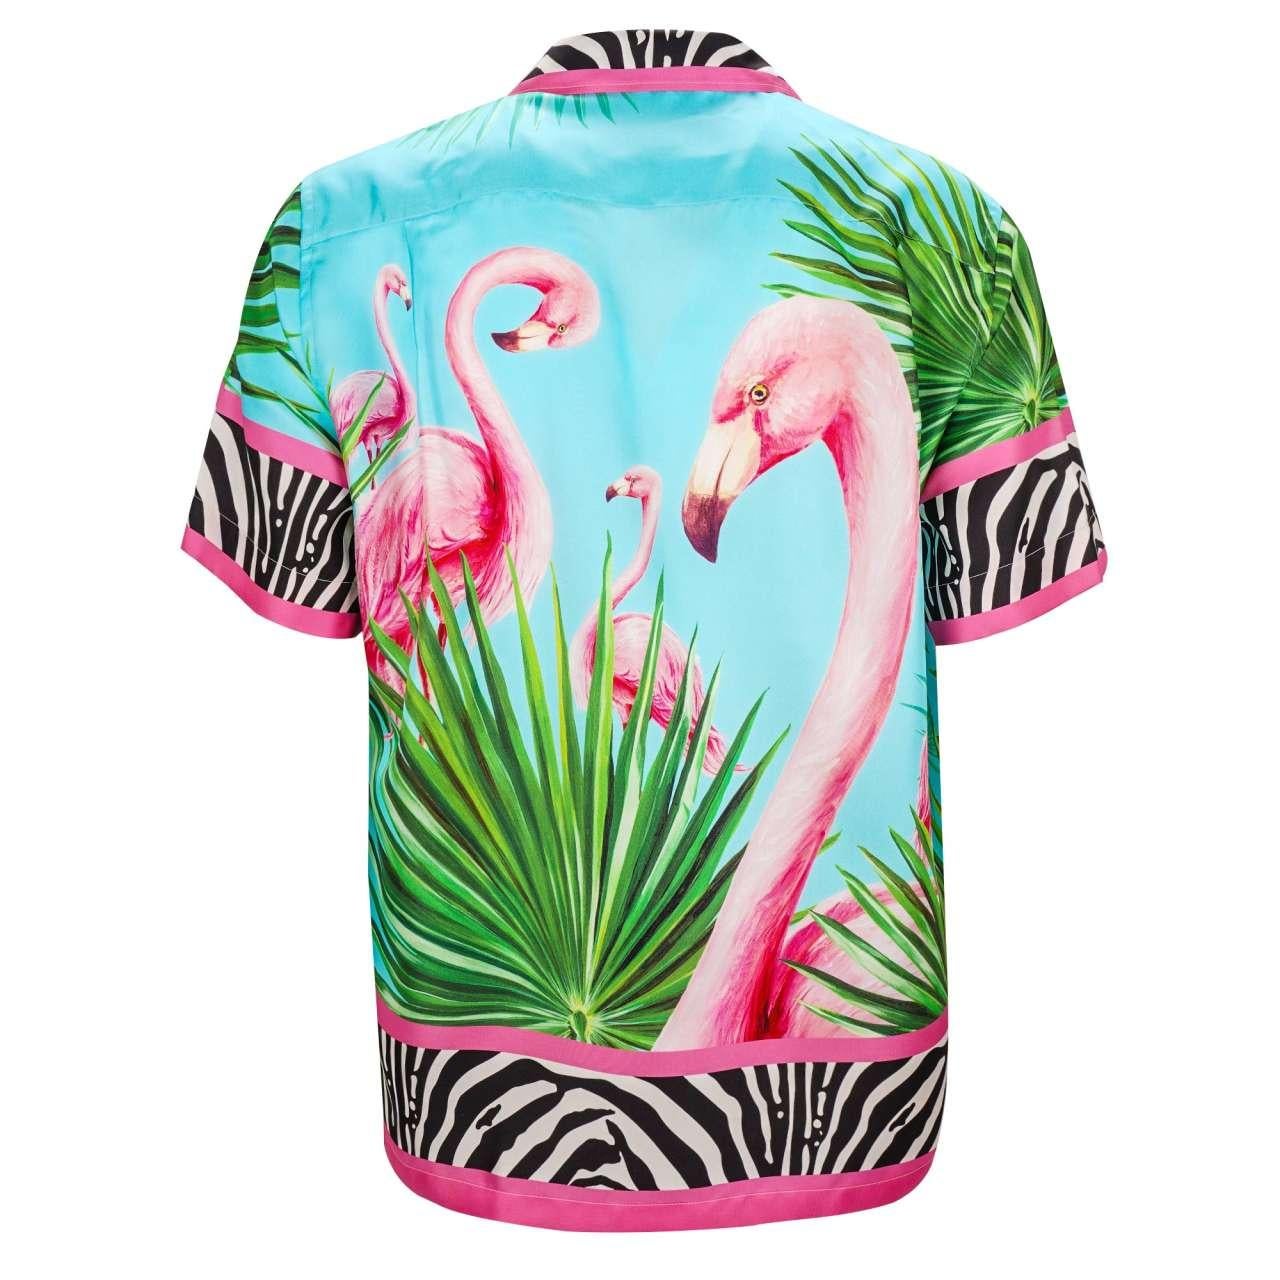 Dolce & Gabbana - DJ Khaled Silk Flamingo Zebra Shirt with Sunglasses and CD 42 In Excellent Condition For Sale In Erkrath, DE